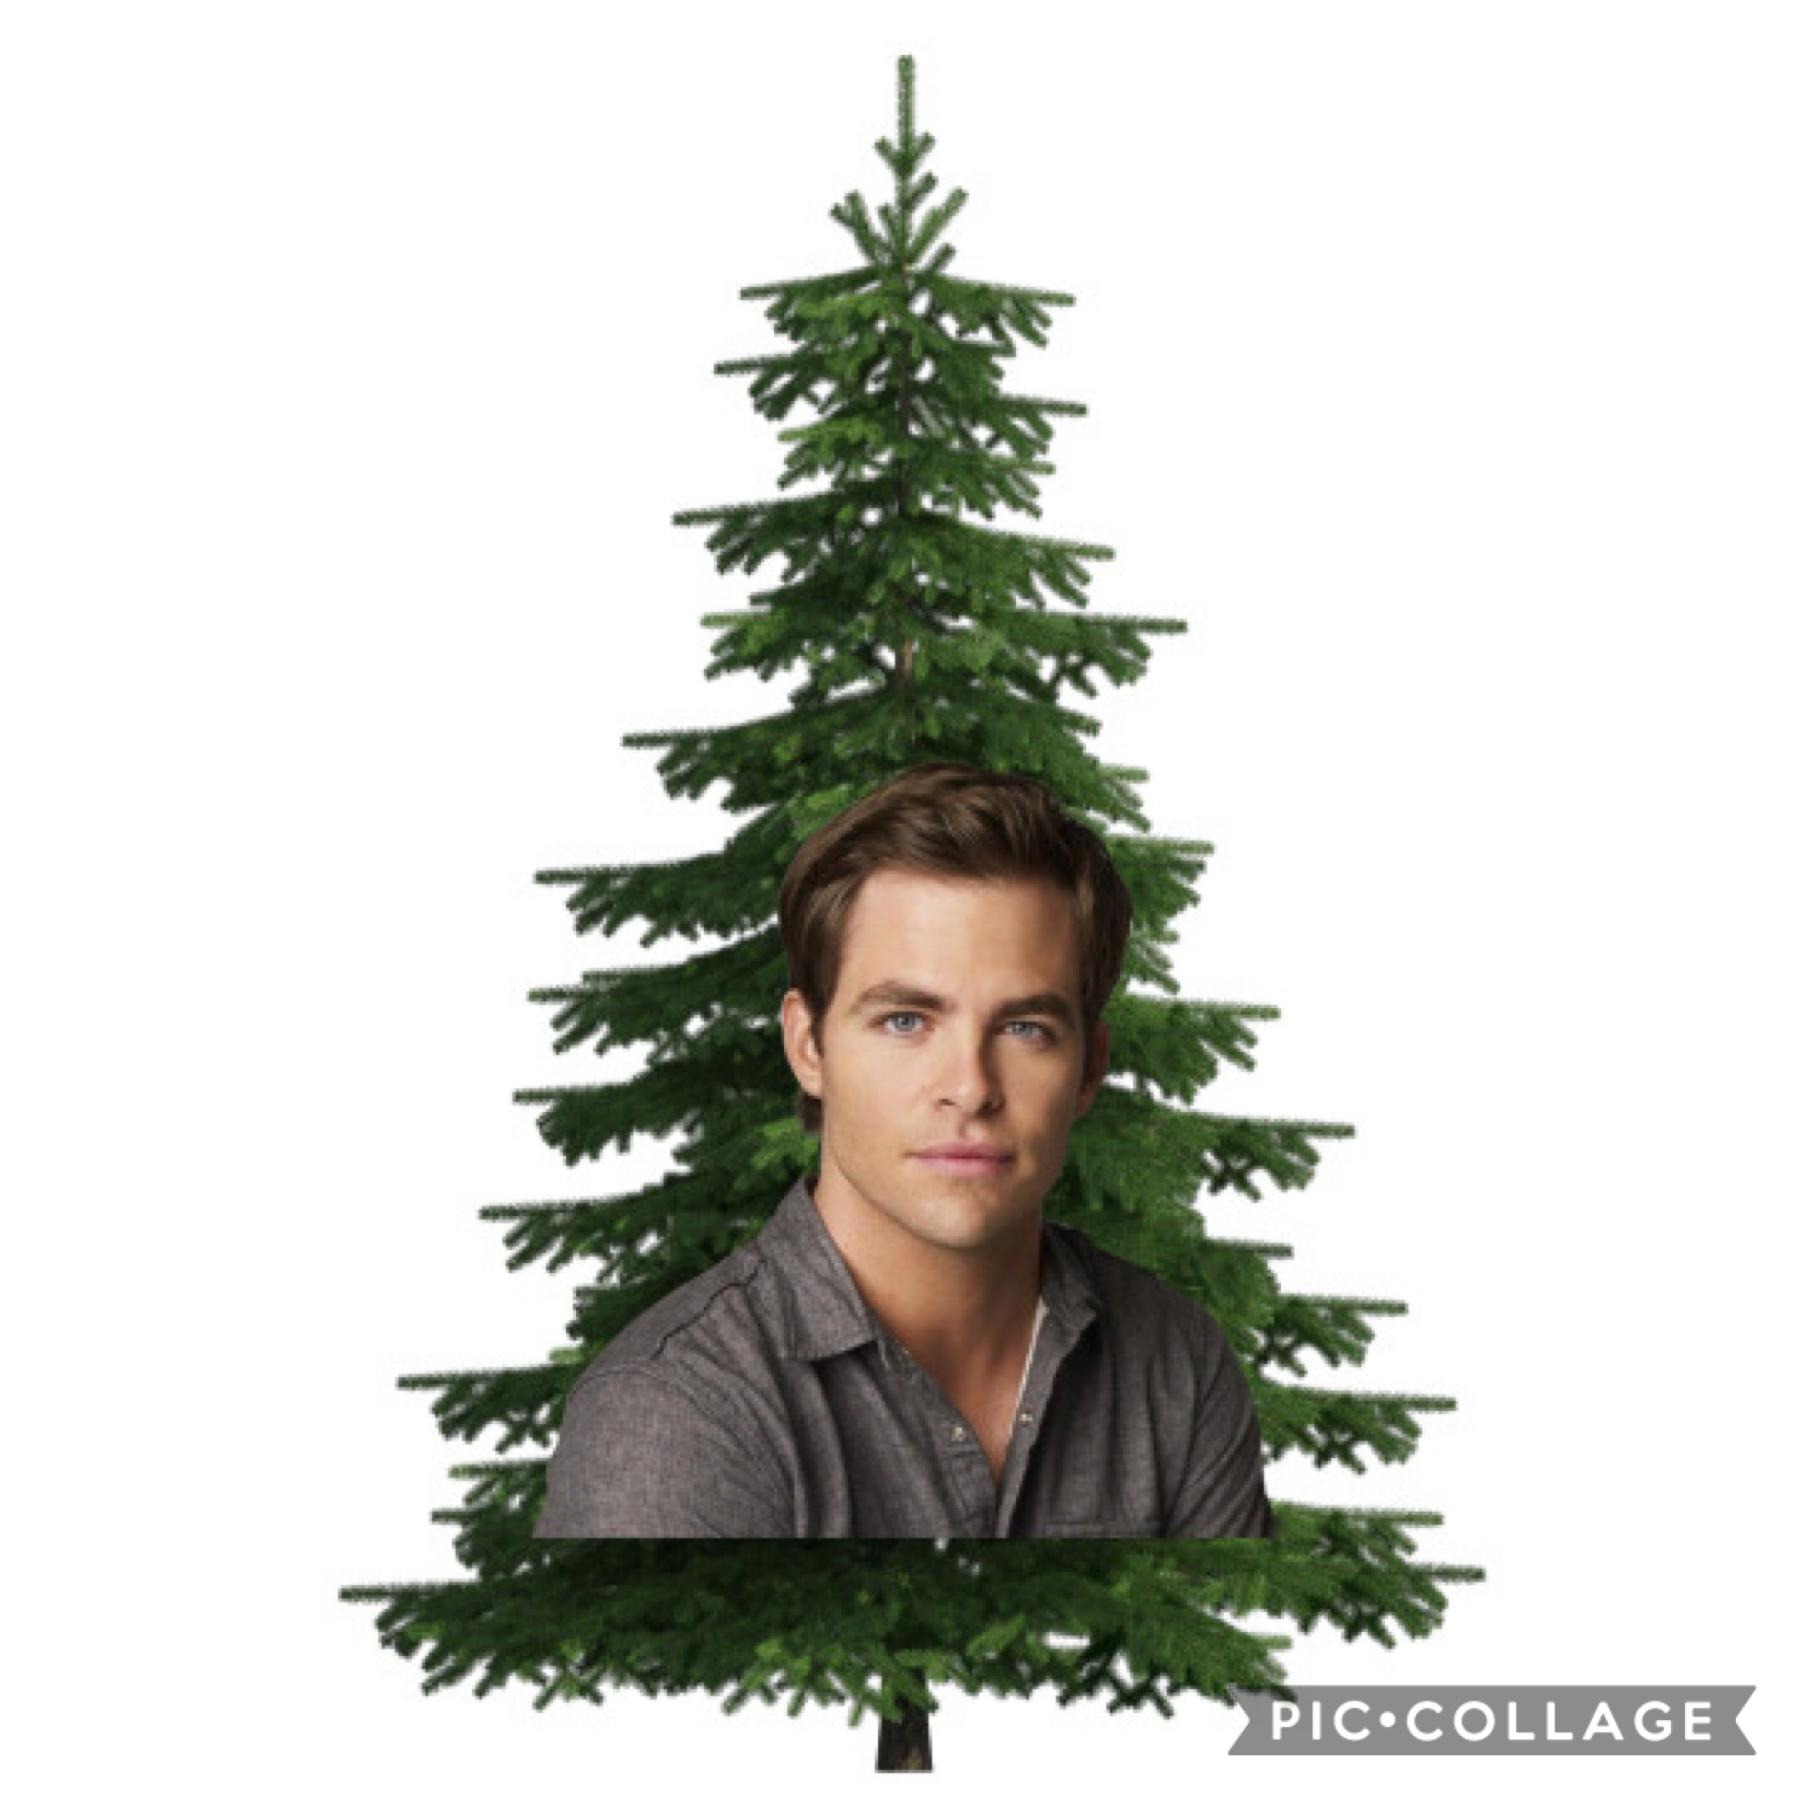 also merry late christmas;) it’s a chris pine 